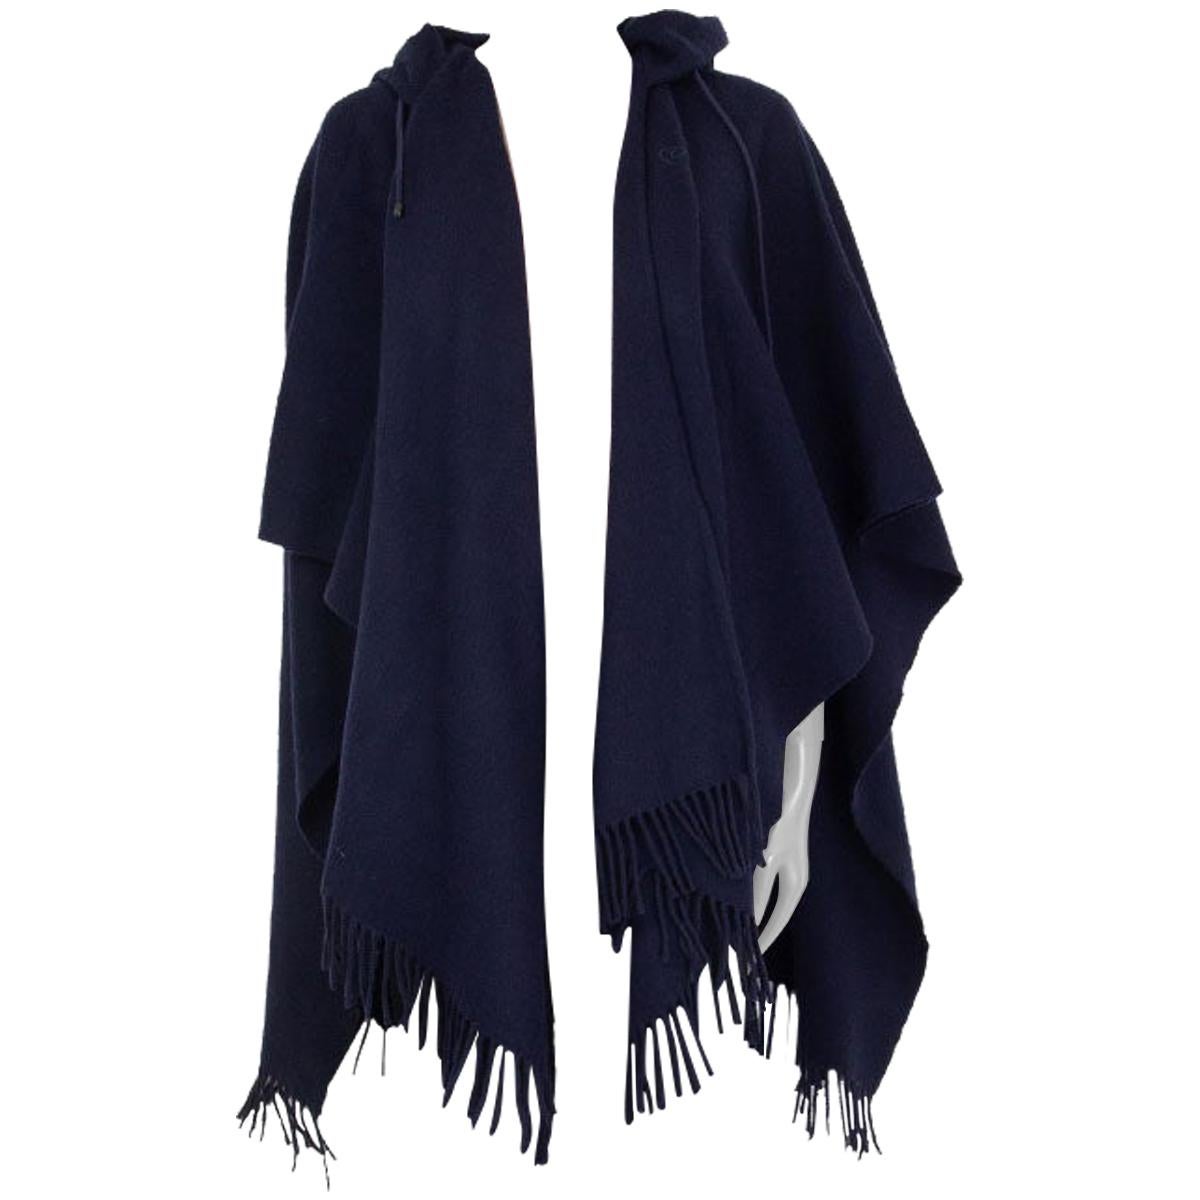 BALENCIAGA blue wool and cashmere HOODED PONCHO Cape Jacket One Size at ...